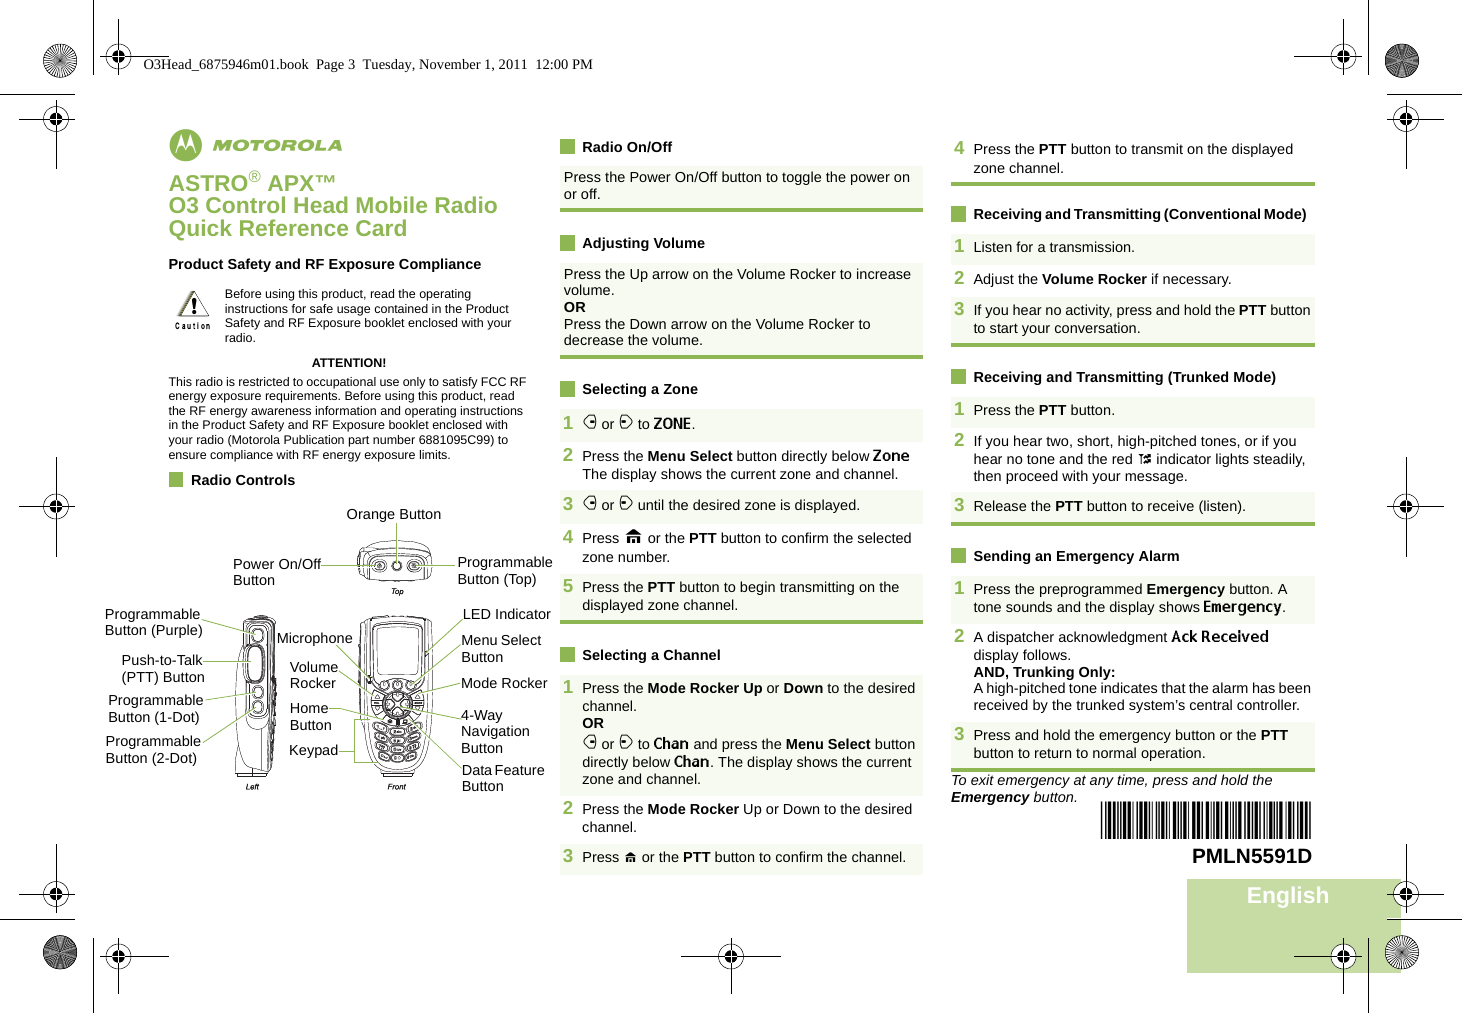 EnglishmASTRO® APX™ O3 Control Head Mobile RadioQuick Reference CardProduct Safety and RF Exposure ComplianceATTENTION!This radio is restricted to occupational use only to satisfy FCC RF energy exposure requirements. Before using this product, read the RF energy awareness information and operating instructions in the Product Safety and RF Exposure booklet enclosed with your radio (Motorola Publication part number 6881095C99) to ensure compliance with RF energy exposure limits. Radio ControlsRadio On/OffAdjusting VolumeSelecting a ZoneSelecting a ChannelReceiving and Transmitting (Conventional Mode)  Receiving and Transmitting (Trunked Mode)  Sending an Emergency AlarmTo exit emergency at any time, press and hold the Emergency button.Before using this product, read the operating instructions for safe usage contained in the Product Safety and RF Exposure booklet enclosed with your radio.!Press the Power On/Off button to toggle the power on or off. Press the Up arrow on the Volume Rocker to increase volume. ORPress the Down arrow on the Volume Rocker to decrease the volume. 1f or a to ZONE. 2Press the Menu Select button directly below Zone The display shows the current zone and channel.3f or a until the desired zone is displayed.4Press H or the PTT button to confirm the selected zone number.5Press the PTT button to begin transmitting on the displayed zone channel.1Press the Mode Rocker Up or Down to the desired channel.ORf or a to Chan and press the Menu Select button directly below Chan. The display shows the current zone and channel.  2Press the Mode Rocker Up or Down to the desired channel.3Press H or the PTT button to confirm the channel. 4Press the PTT button to transmit on the displayed zone channel. 1Listen for a transmission.2Adjust the Volume Rocker if necessary.3If you hear no activity, press and hold the PTT button to start your conversation.1Press the PTT button.2If you hear two, short, high-pitched tones, or if you hear no tone and the red t indicator lights steadily, then proceed with your message.3Release the PTT button to receive (listen).1Press the preprogrammed Emergency button. A tone sounds and the display shows Emergency.2A dispatcher acknowledgment Ack Received display follows.AND, Trunking Only:A high-pitched tone indicates that the alarm has been received by the trunked system’s central controller.3Press and hold the emergency button or the PTT button to return to normal operation.*PMLN5591D*PMLN5591DProgrammable Button (Top)Orange ButtonPower On/Off ButtonProgrammable Button (Purple)Programmable Button (1-Dot)Push-to-Talk (PTT) ButtonProgrammable Button (2-Dot)Volume RockerHome ButtonKeypadData Feature Button4-Way Navigation ButtonMode RockerMenu Select ButtonLED IndicatorMicrophoneO3Head_6875946m01.book  Page 3  Tuesday, November 1, 2011  12:00 PM